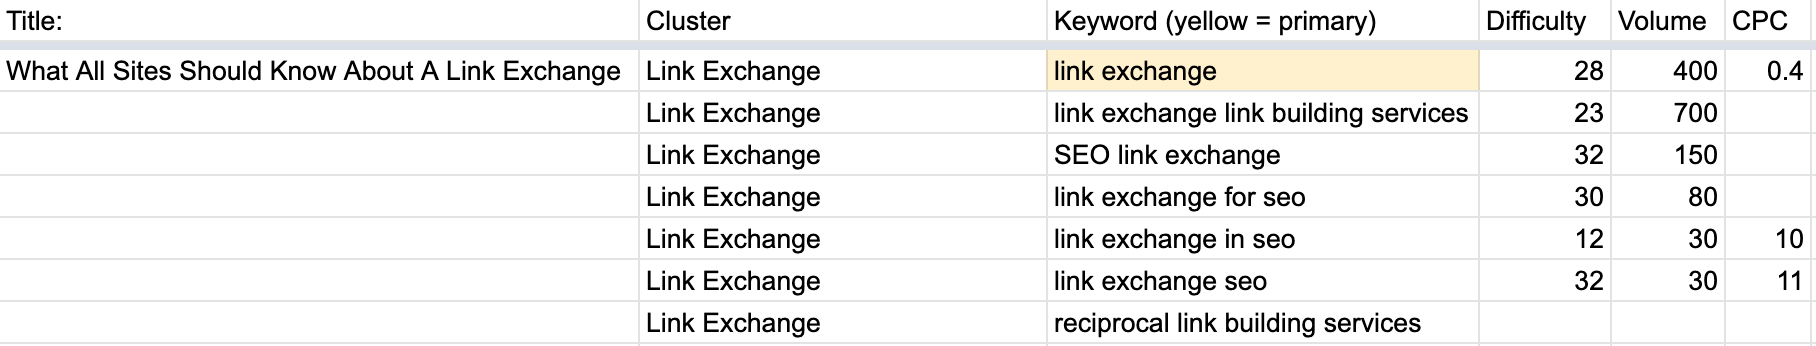 Using Google Spreadsheets to Identify Keyword Groups for a Semantic SEO Strategy